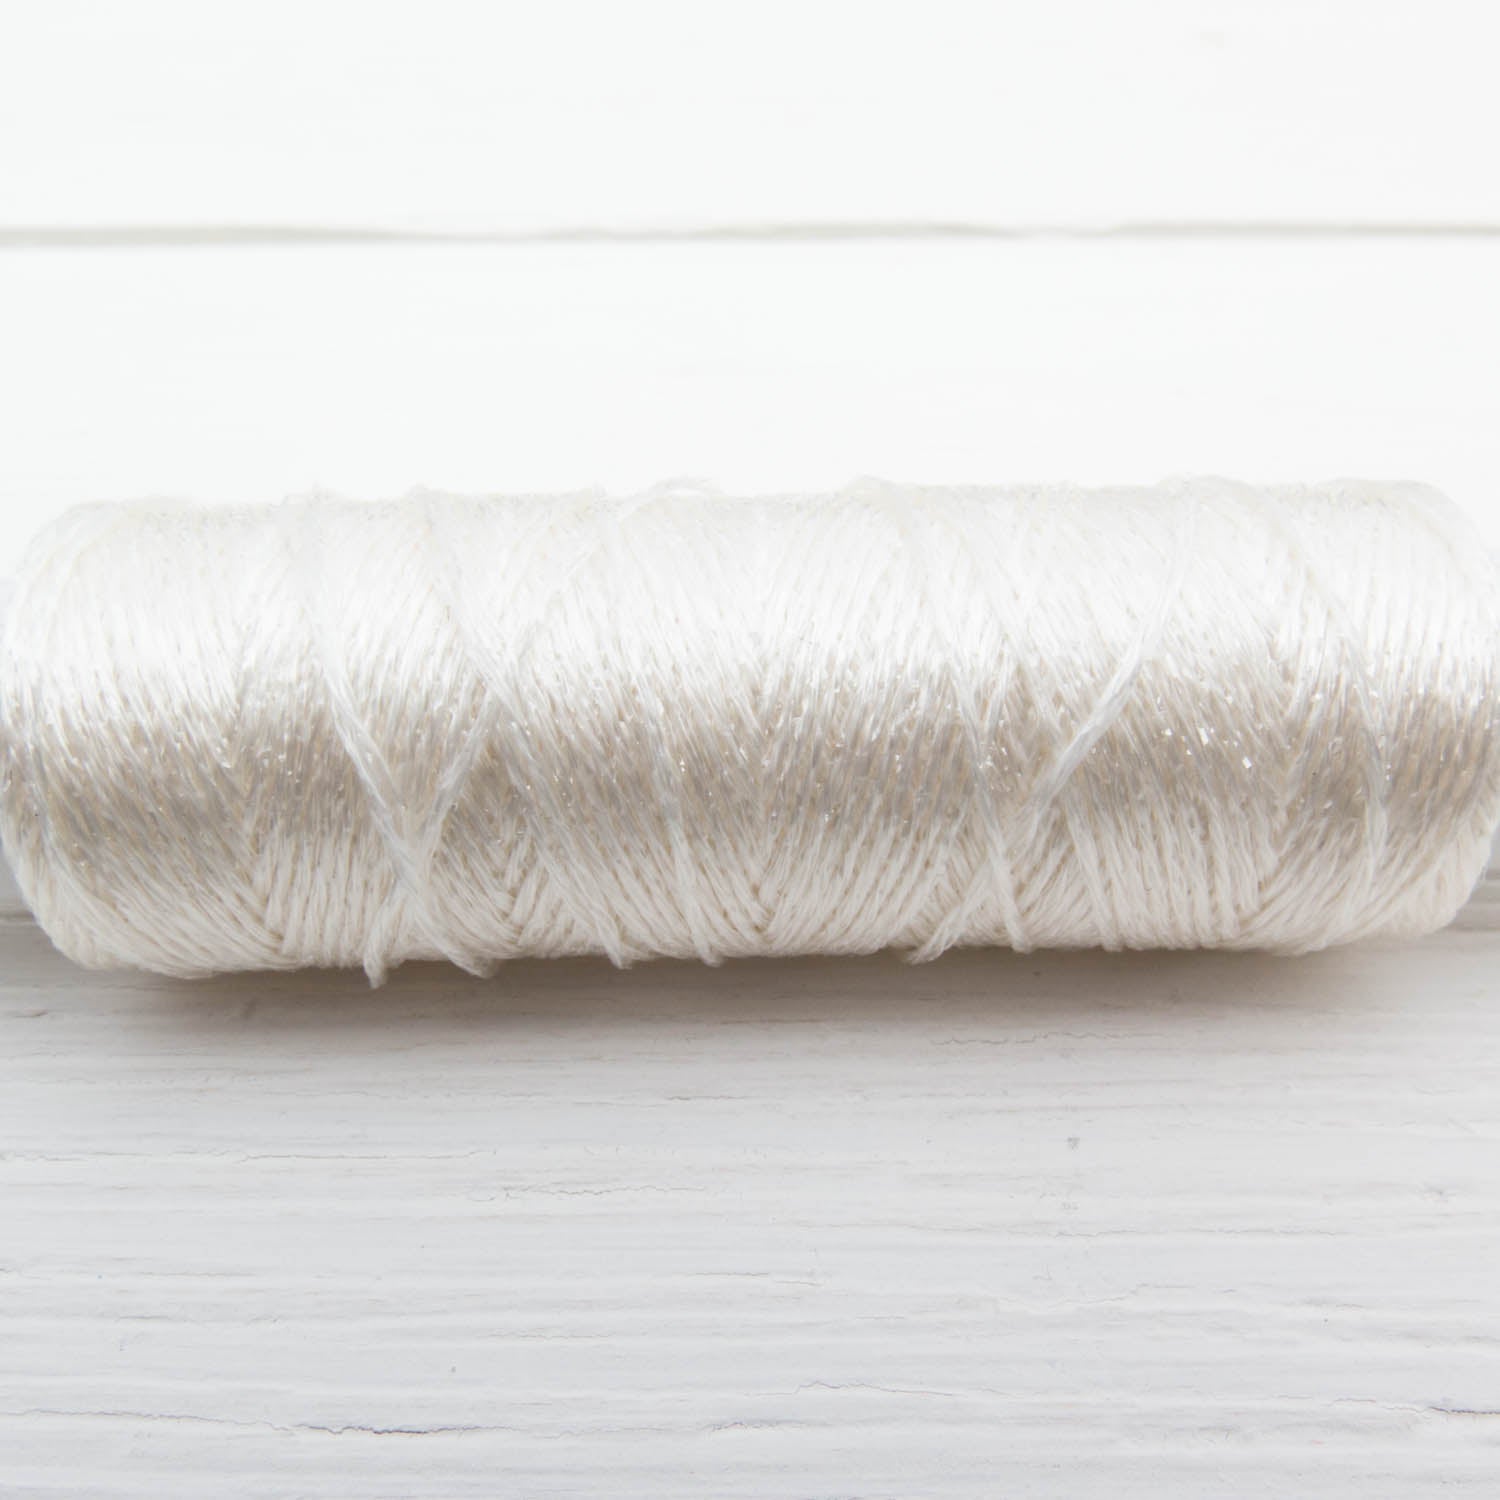 Metallic Embroidery Floss - Silver – Snuggly Monkey